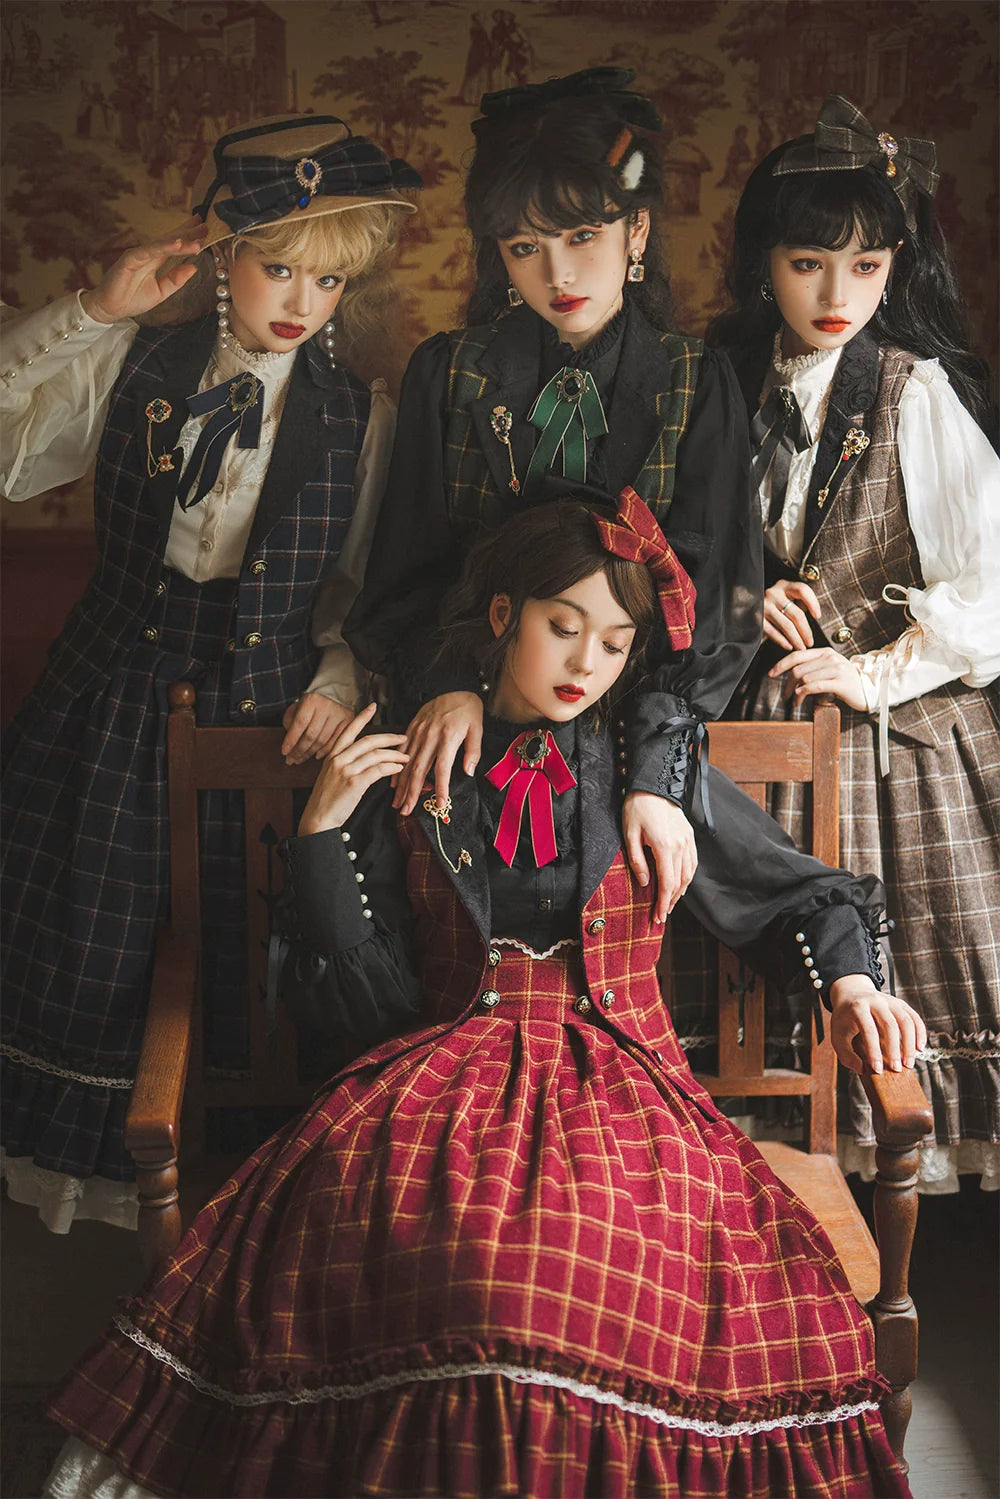 British Classical Lolita Stand Collar Blouse [20% off when purchased together]